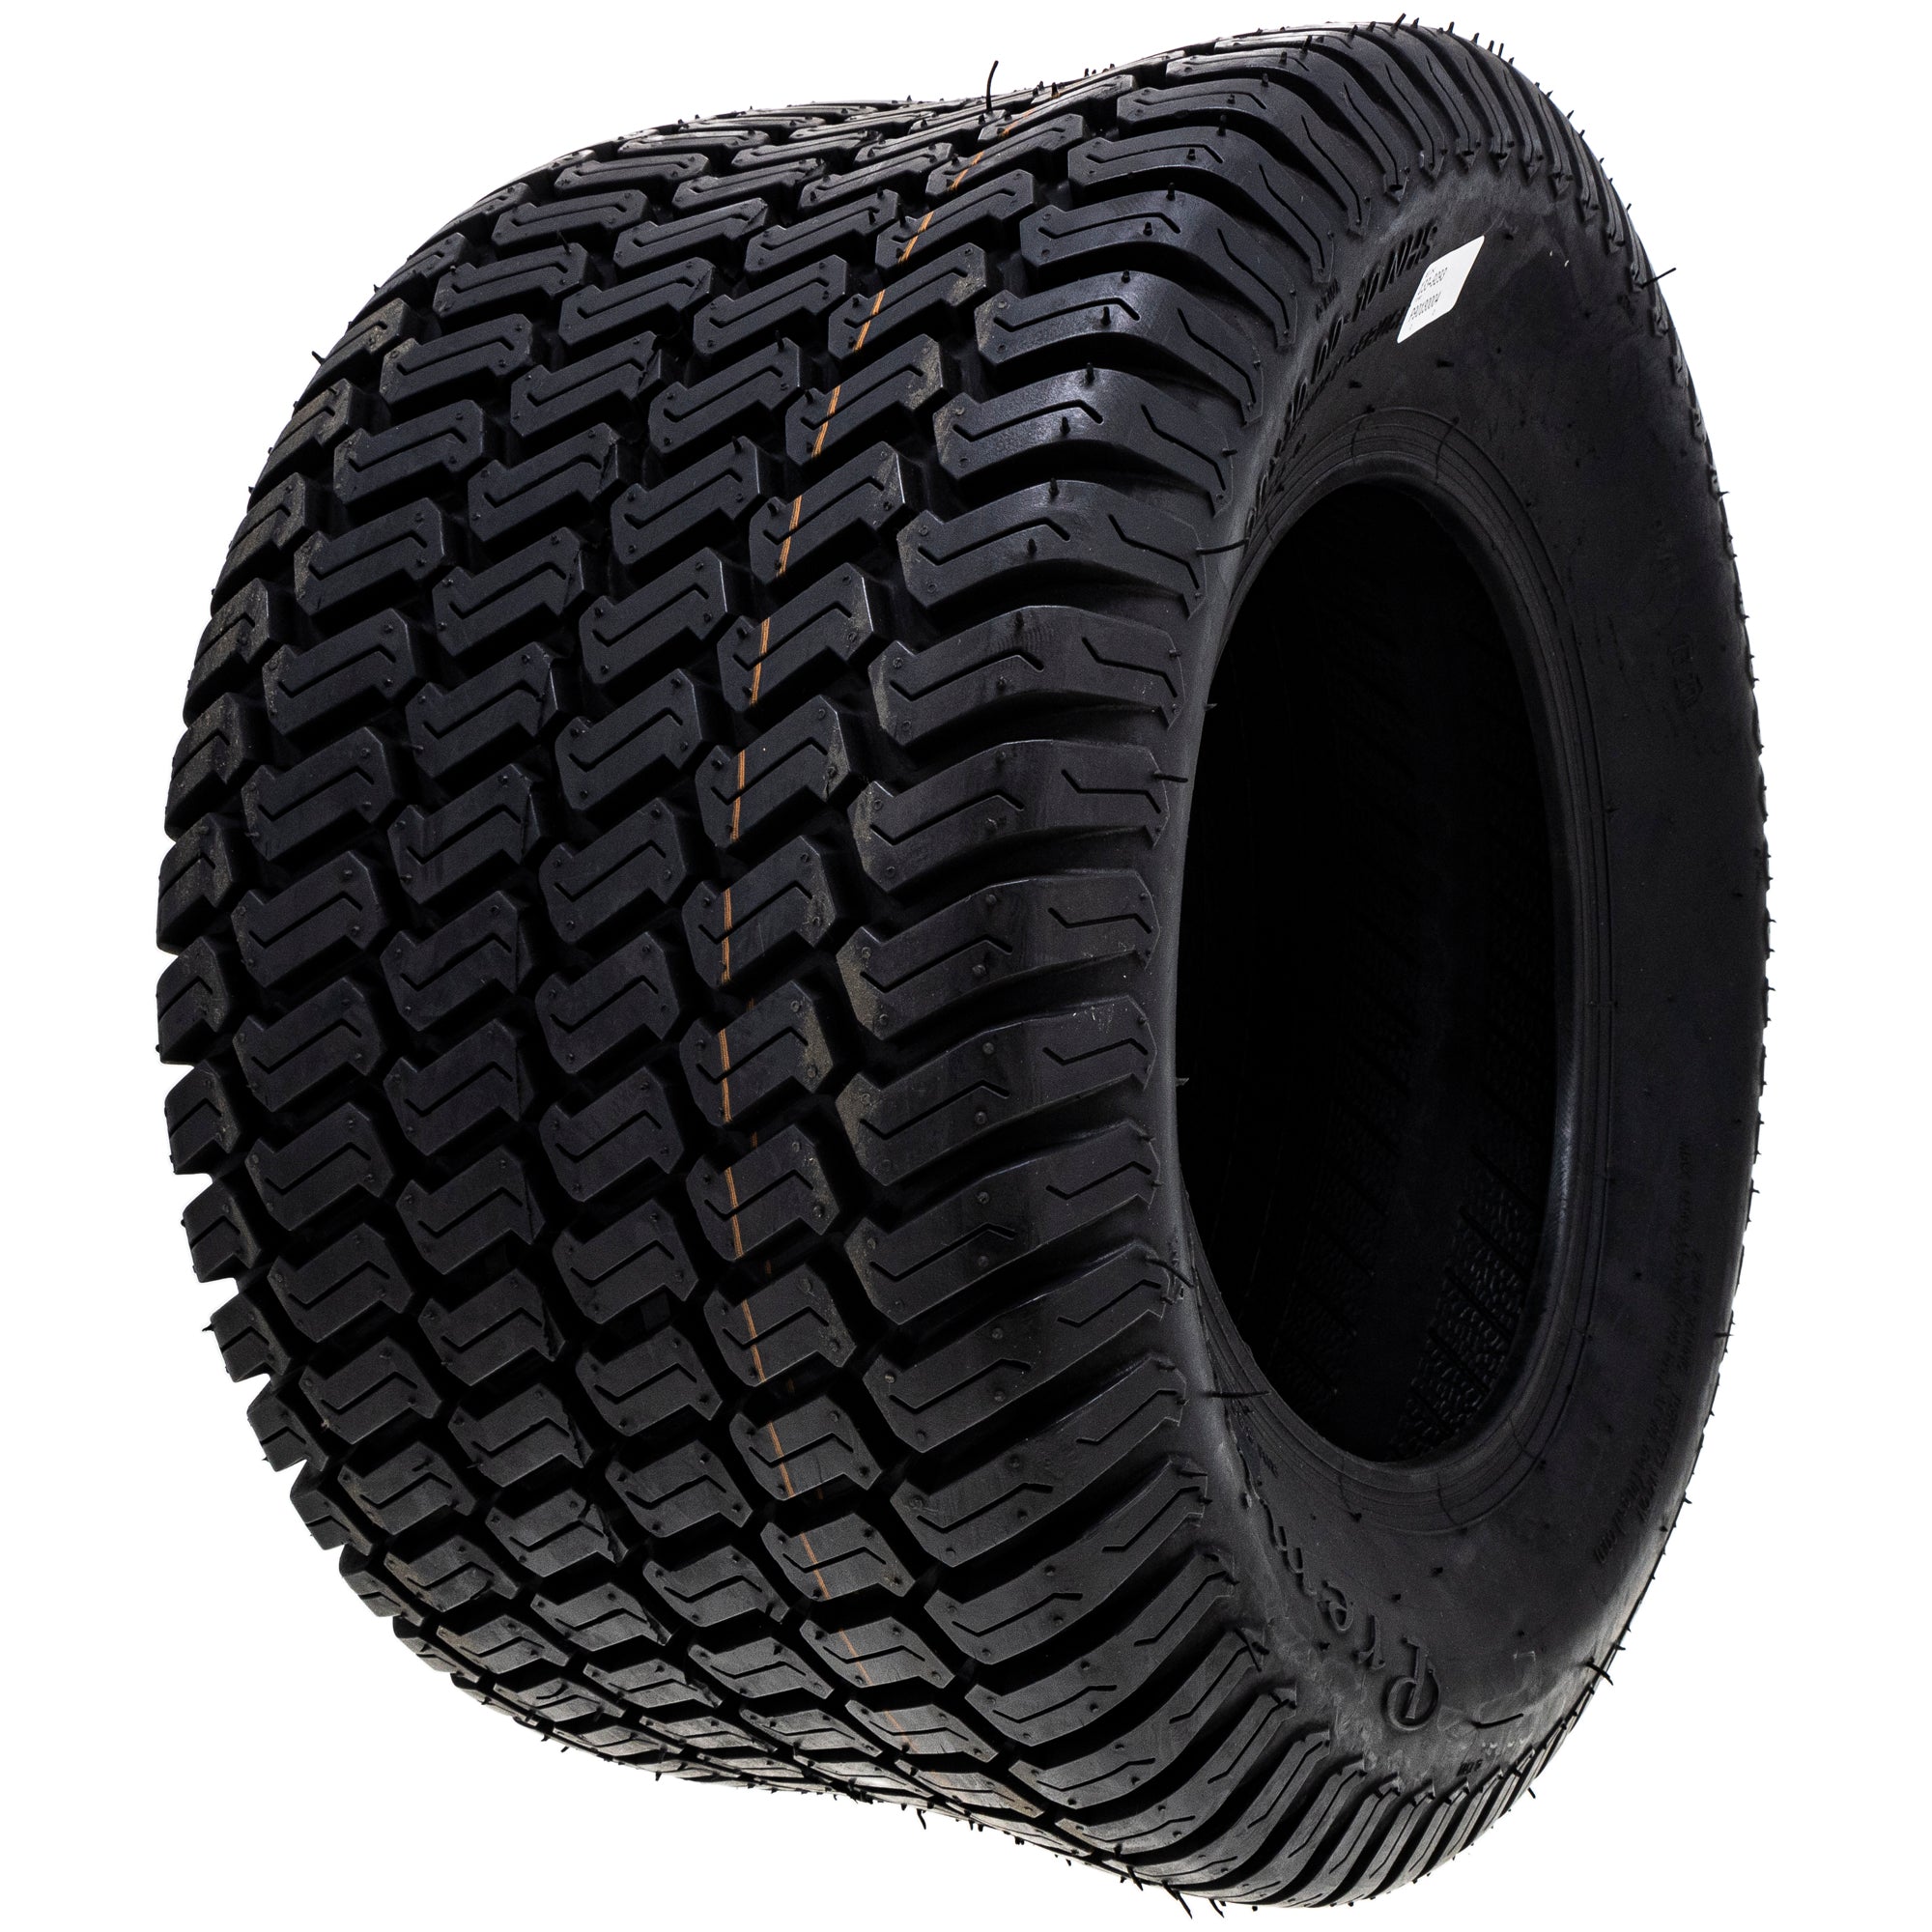 Exmark 133-9293 2 Tires 2-Pack | Mow The Lawn